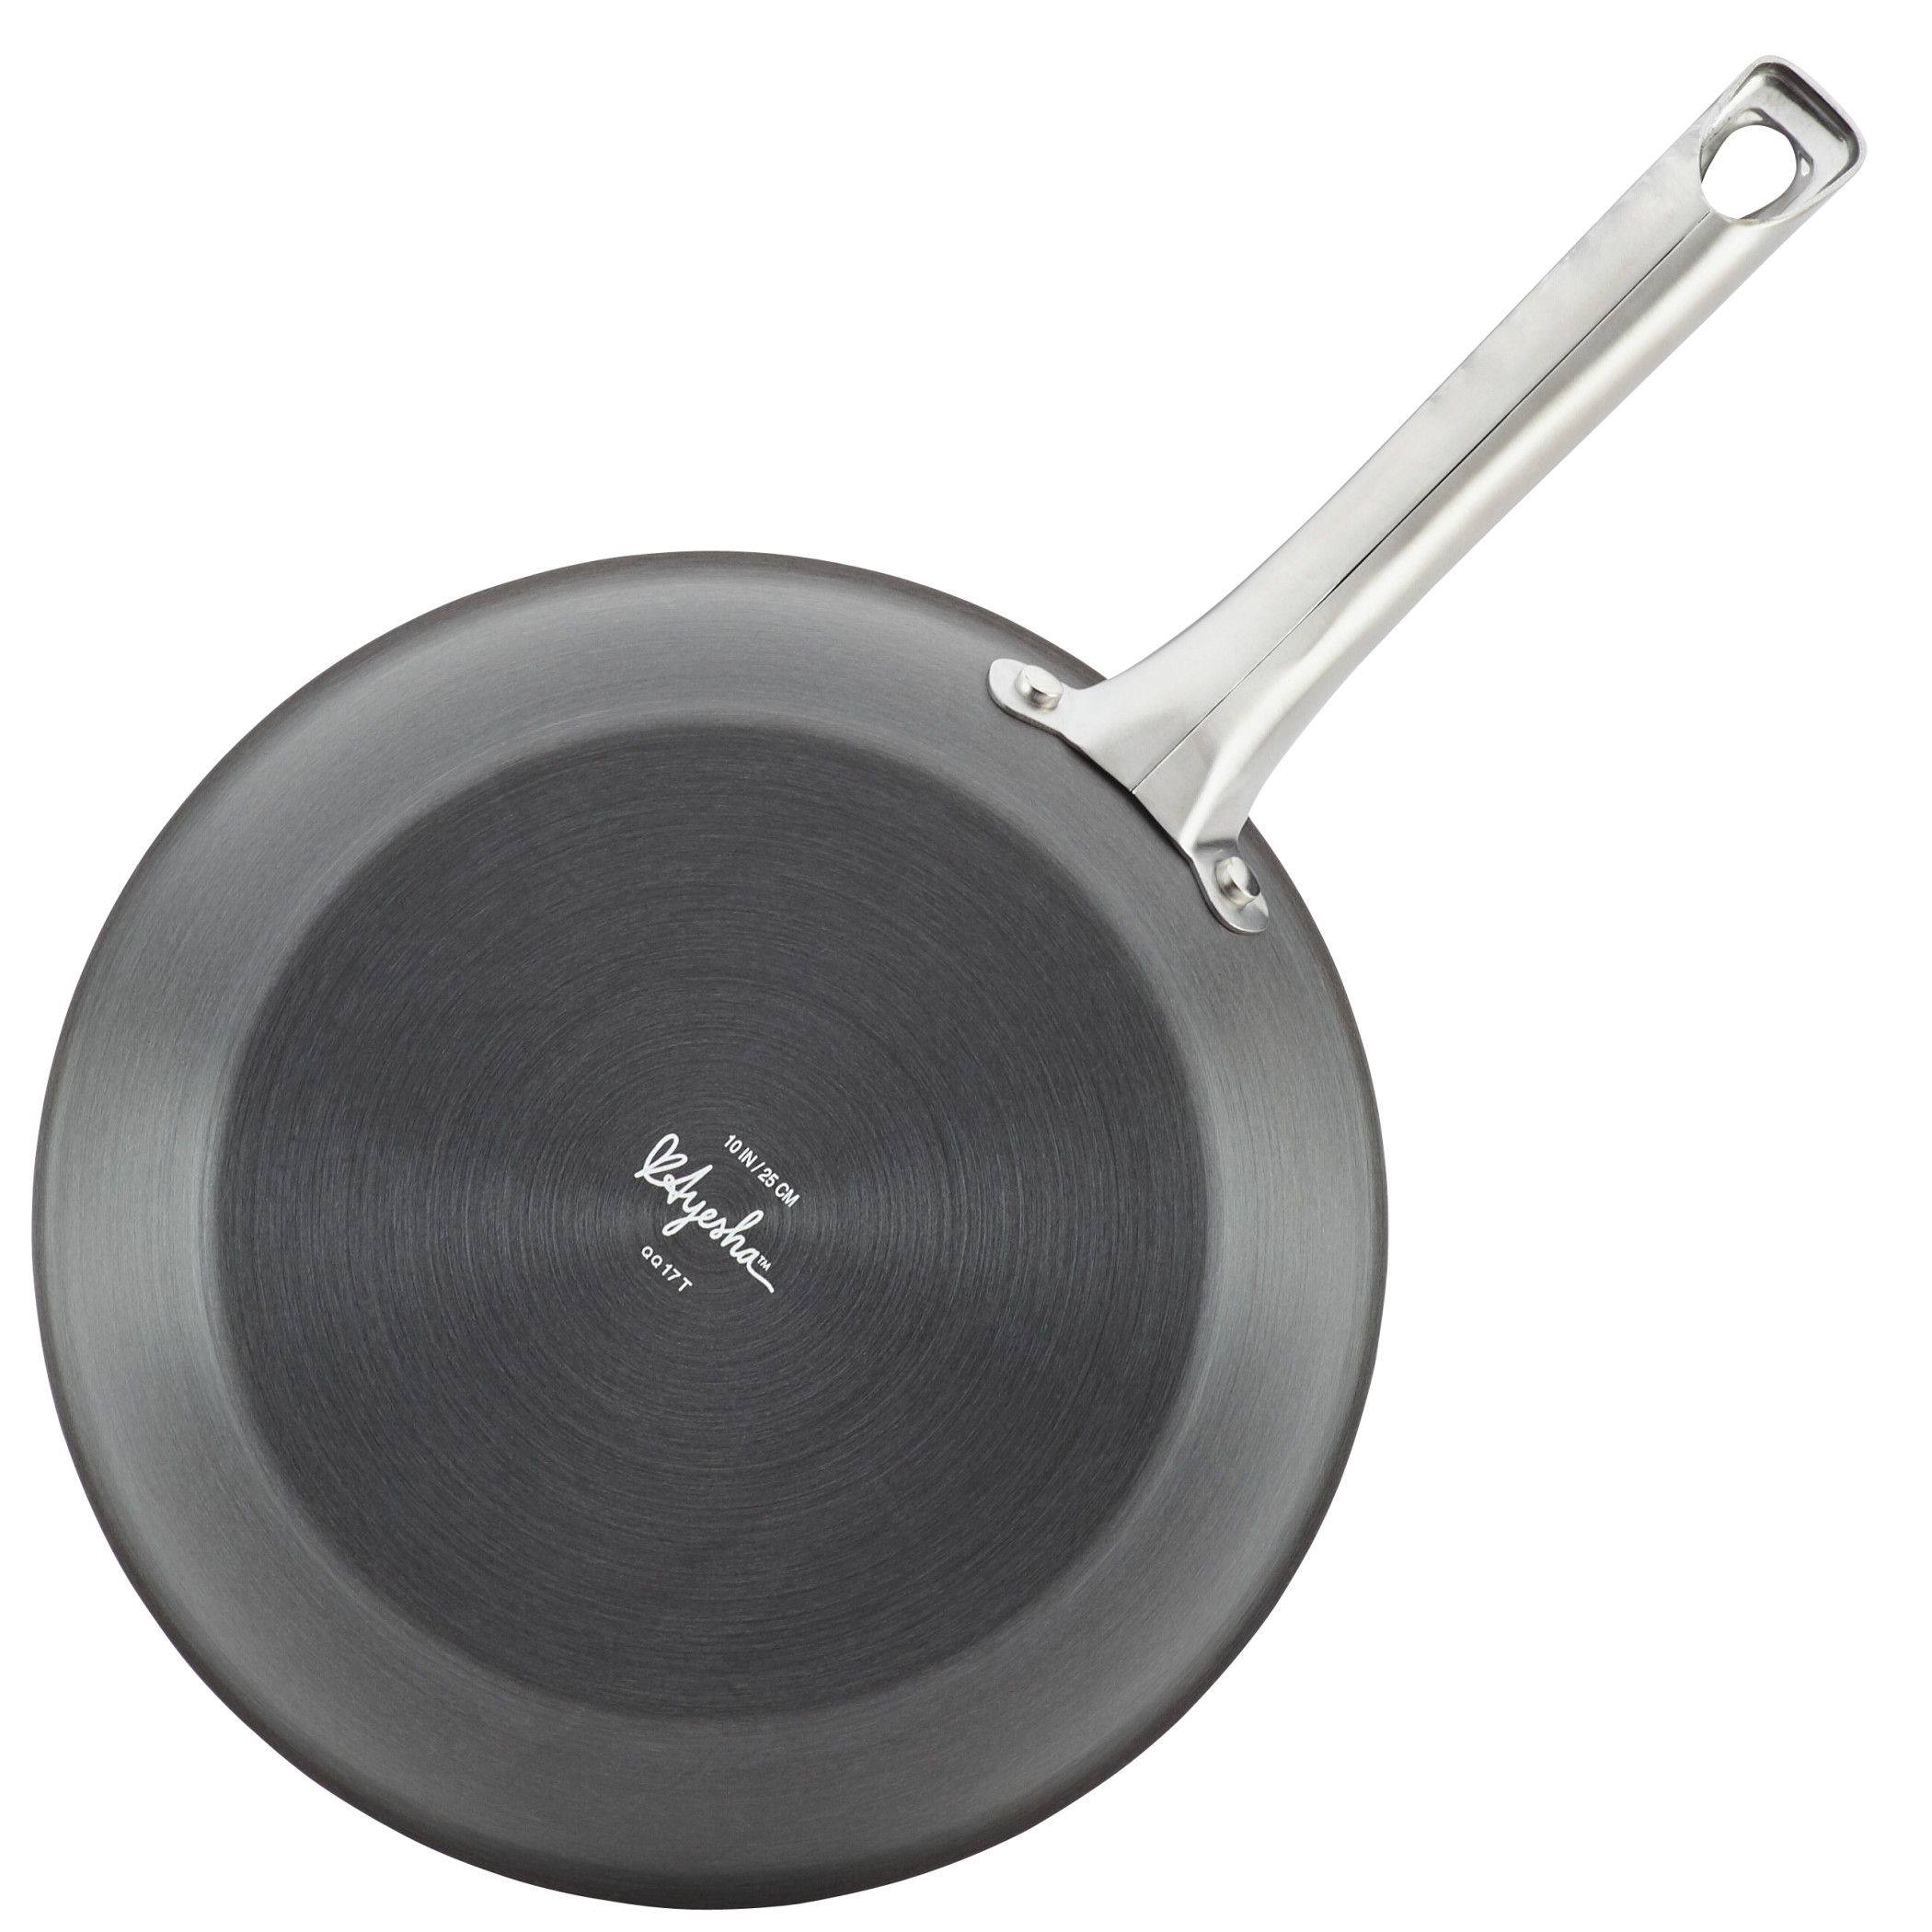 Ayesha Curry Home Collection 10 Piece Hard Anodized Aluminum Pots and Pans, Gray - image 5 of 9